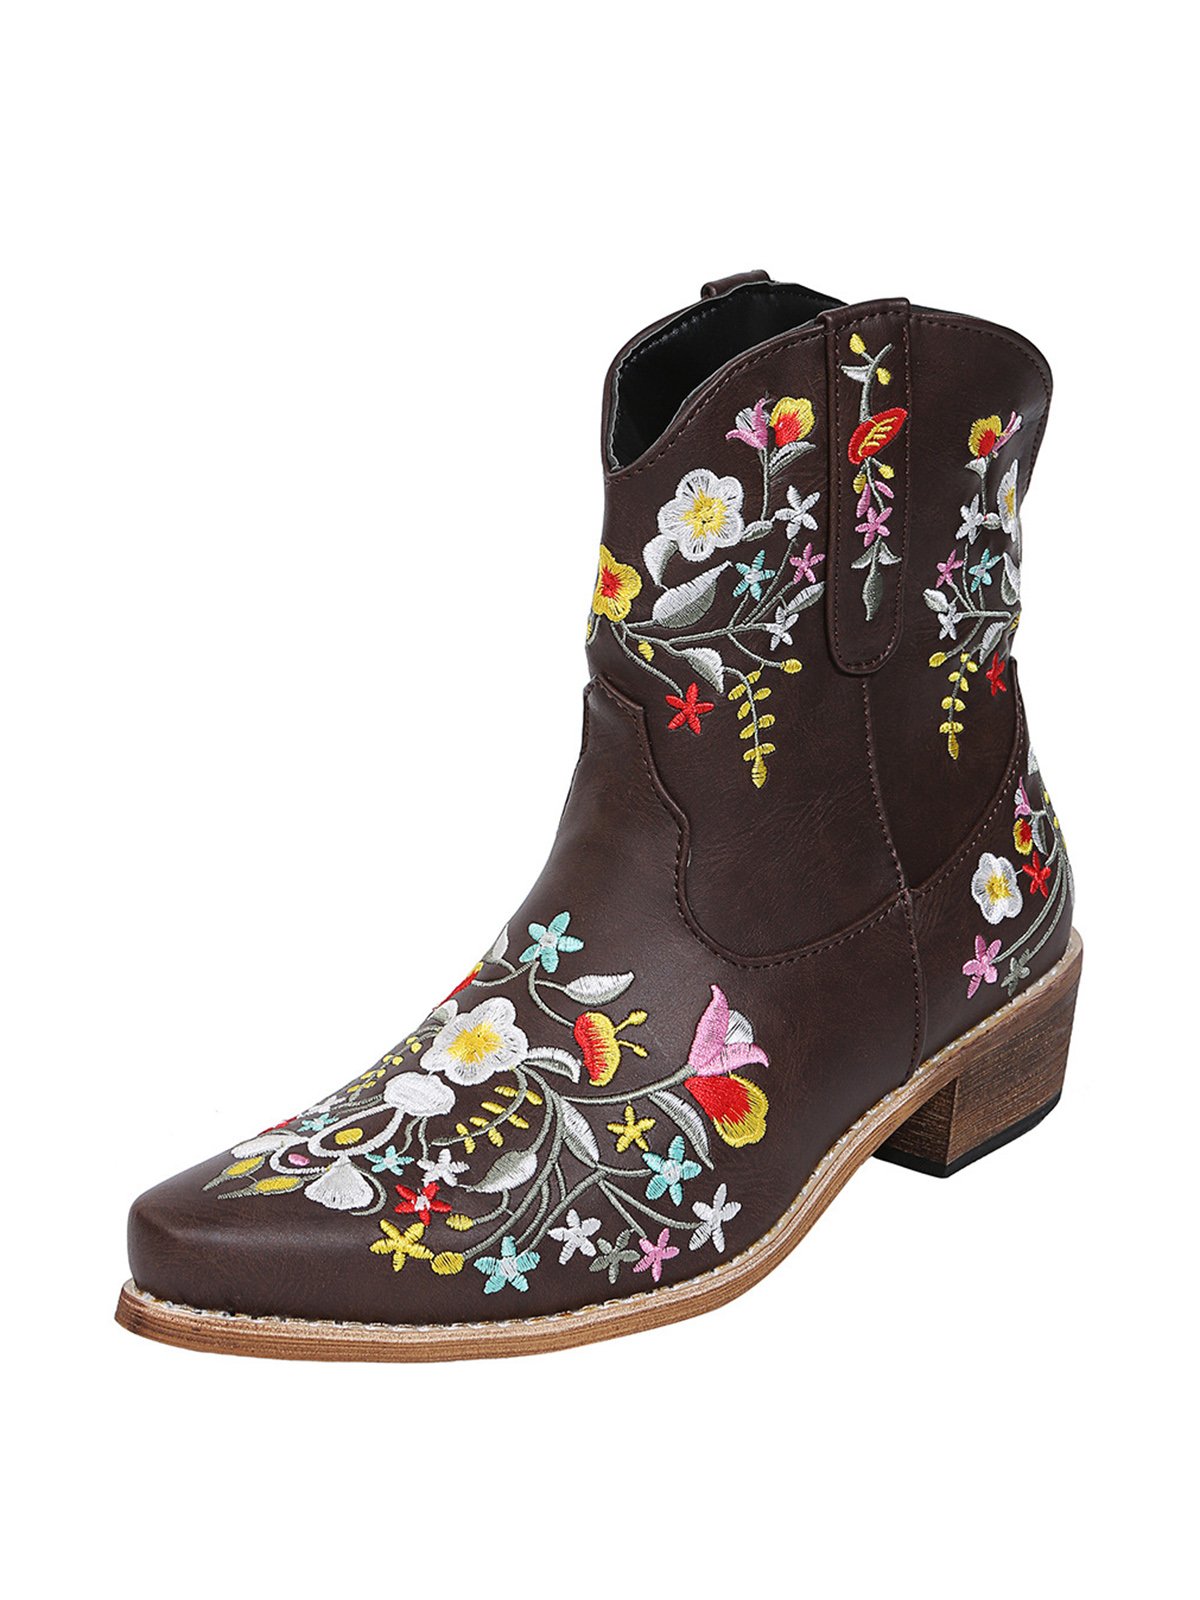 Women's Vintage Ethnic Floral Embroidered Pointed Toe Chunky Heel Low Boots